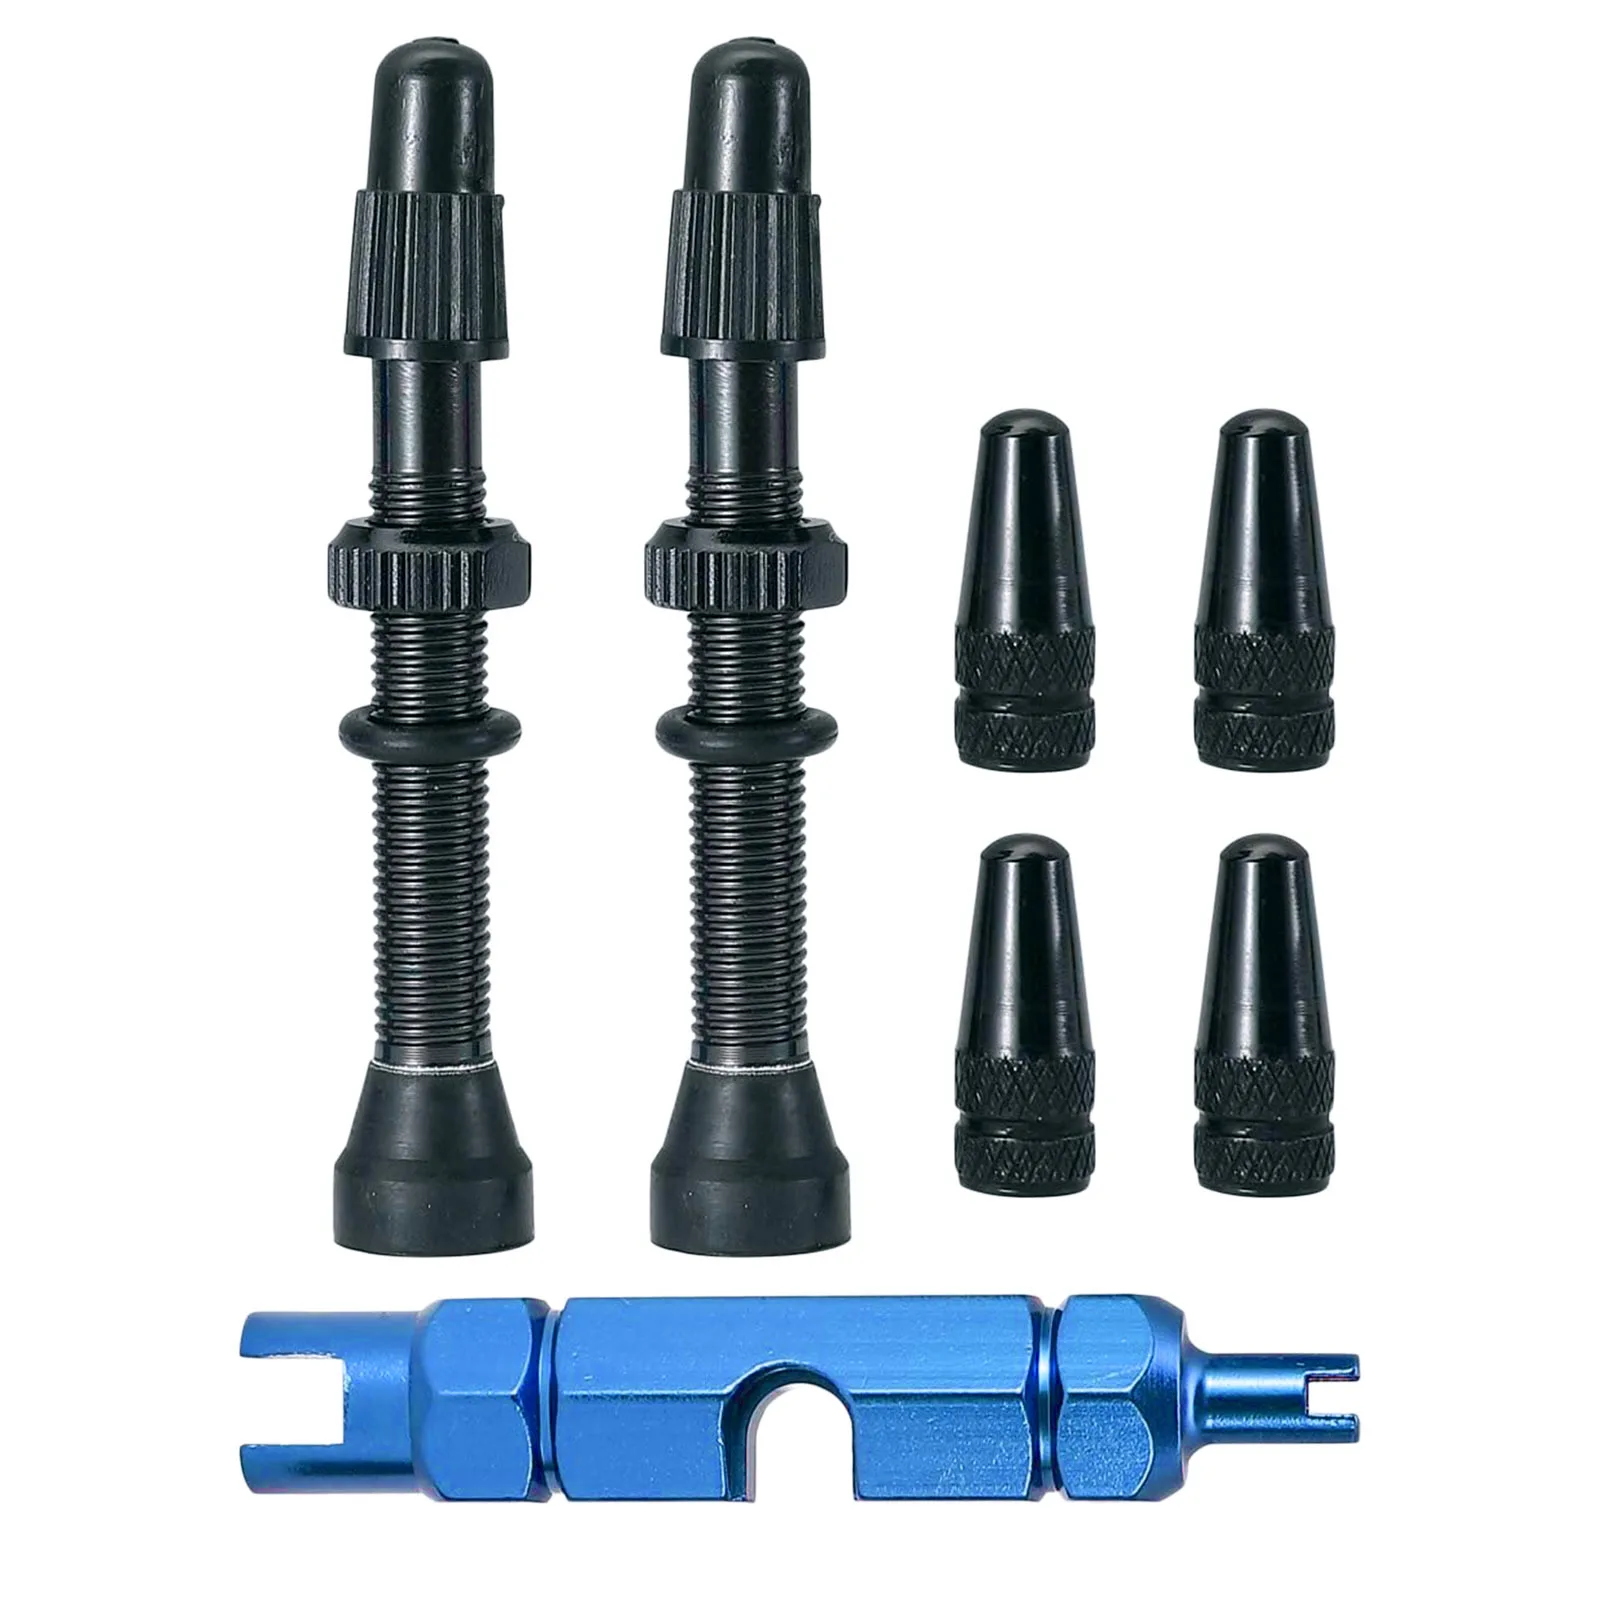  Valve Core Removal Tool Kit,  Multi-function Valve Core Removal Tools with